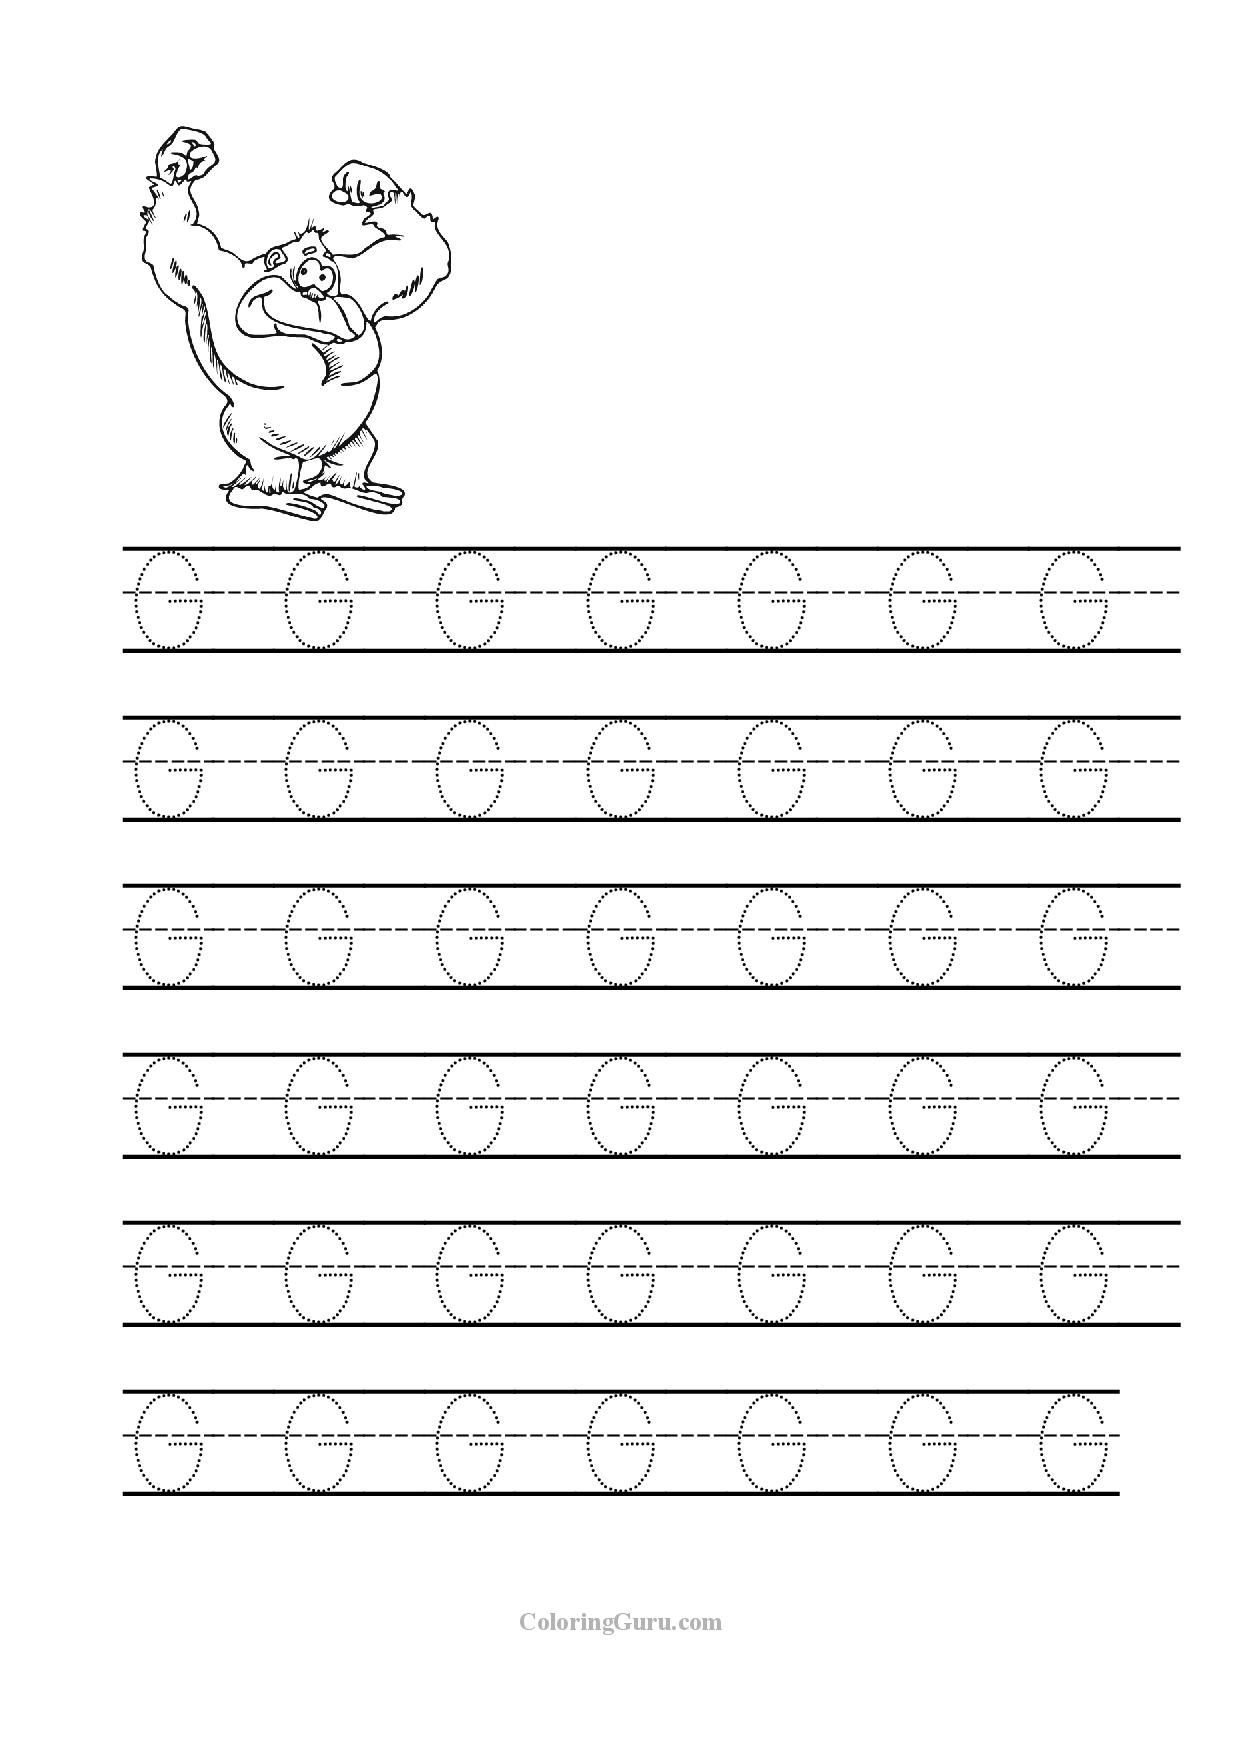 Free Printable Tracing Letter G Worksheets For Preschool in G Letter Tracing Worksheet